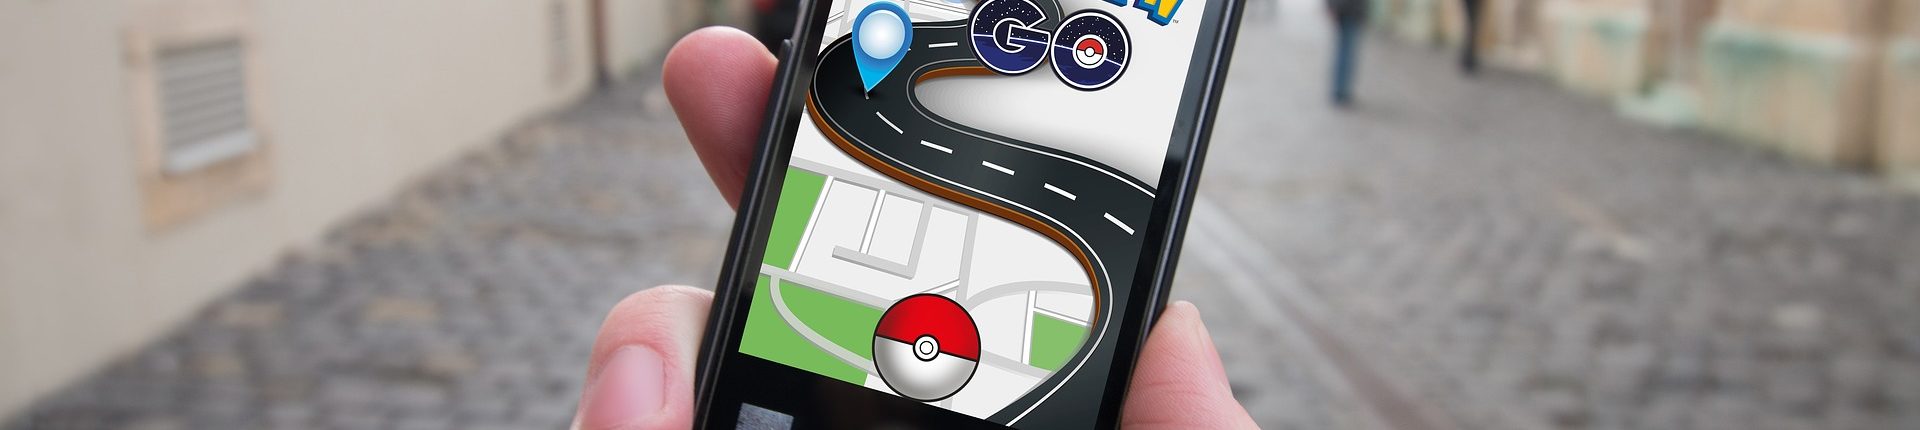 Close-up of a hand holding a phone open to the Pokémon GO app in front of a blurred street